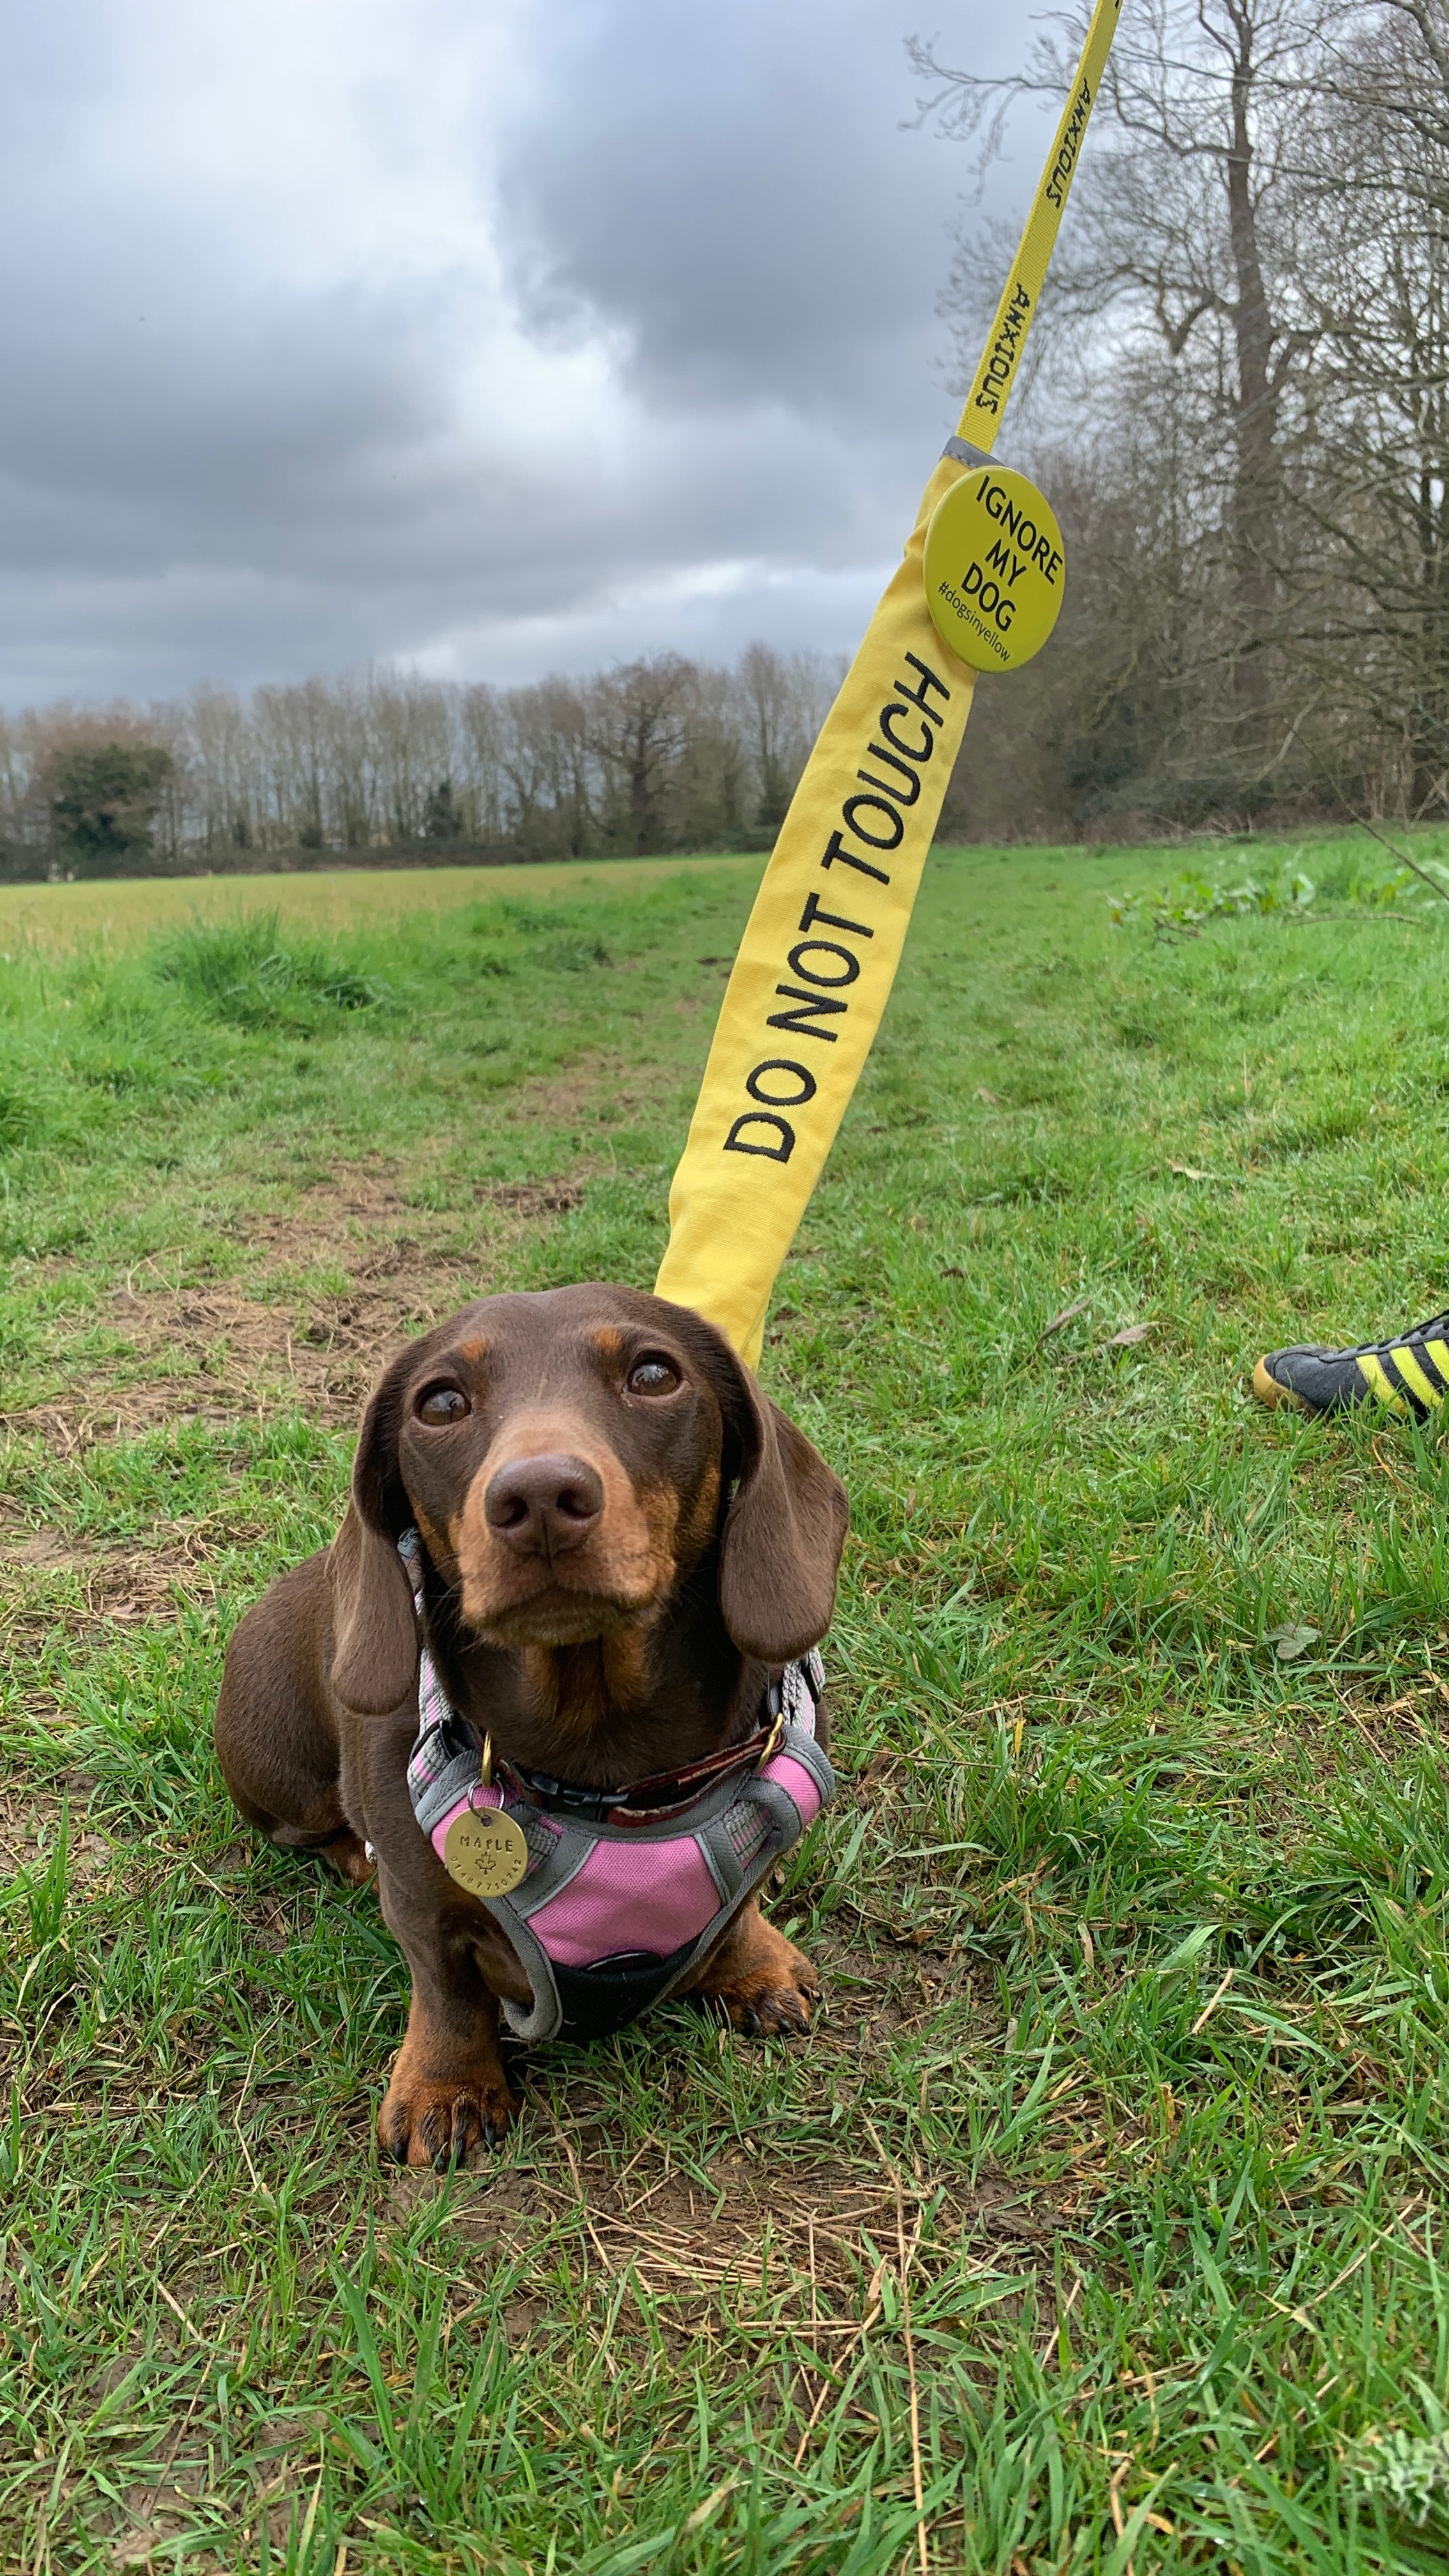 a happy Dachund on a walk in a pink harness along with a bright yellow lead and sleeve which shows the words "do not touch"